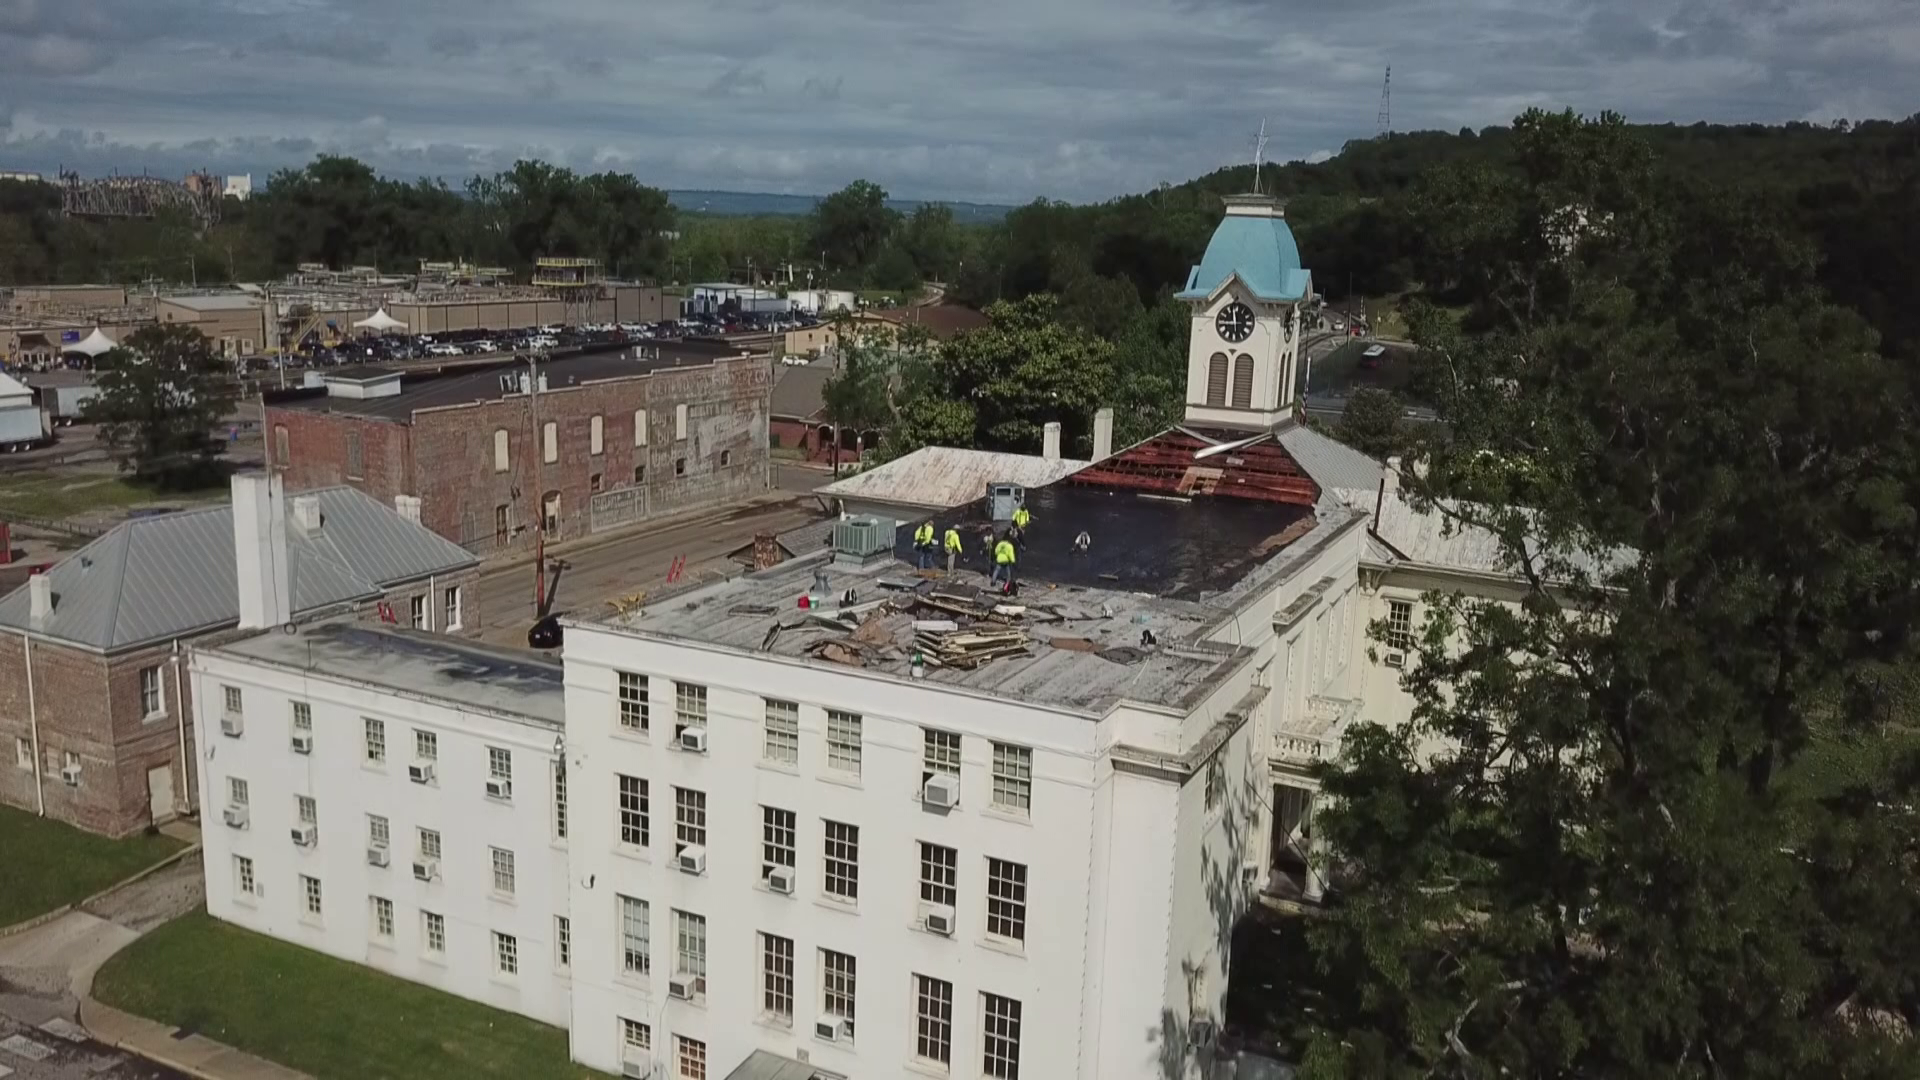 Parts of the courthouse roof were ripped off after an EF-1 tornado tore through Van Buren Monday night.